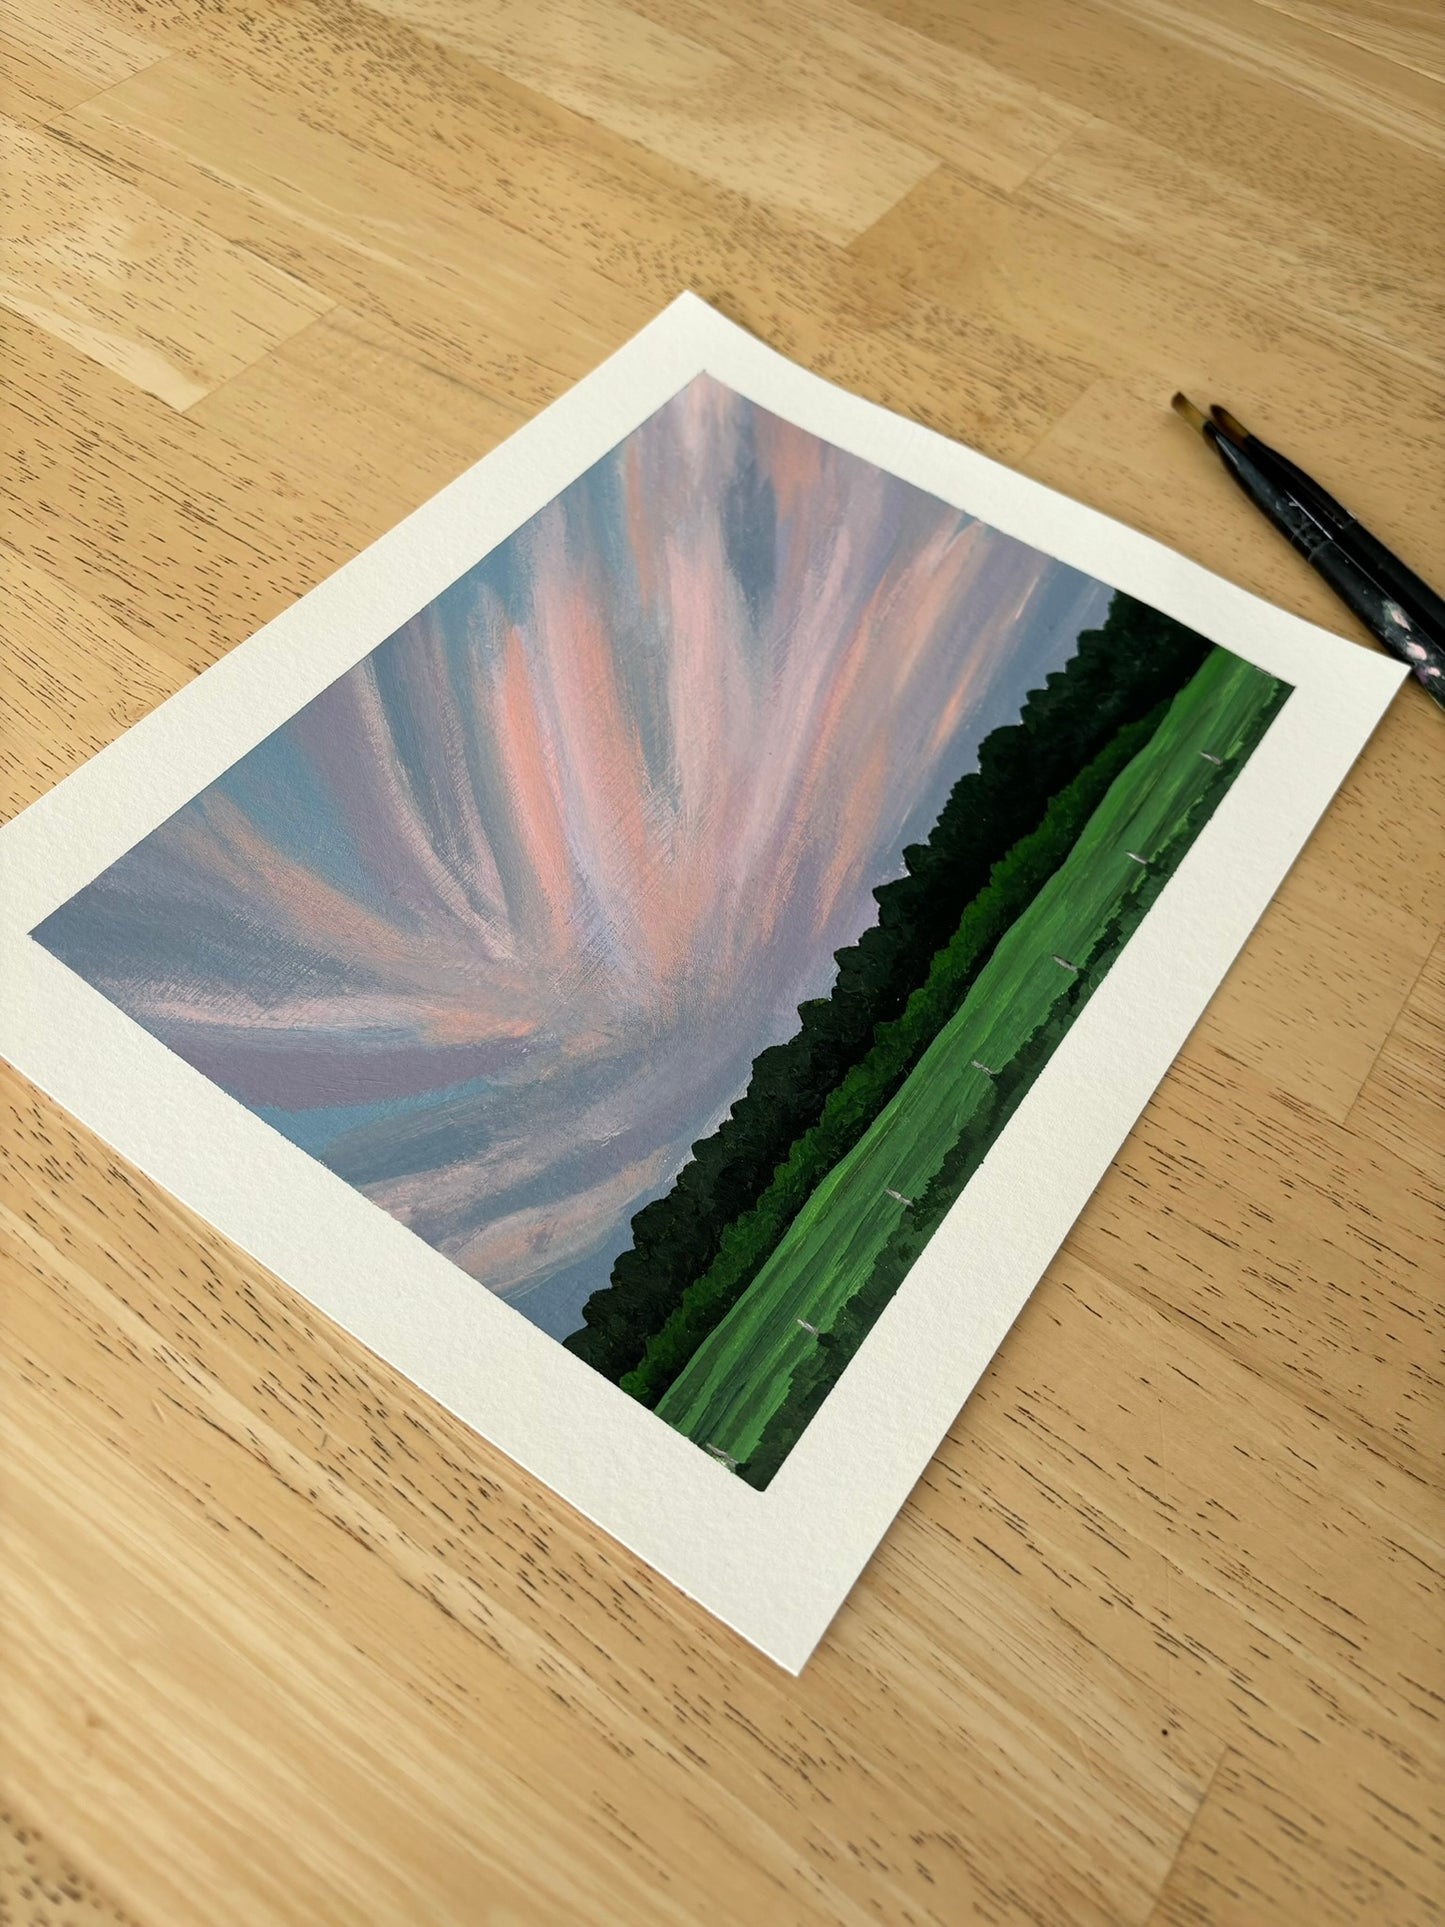 "Sky of Fire" acrylic landscape painting